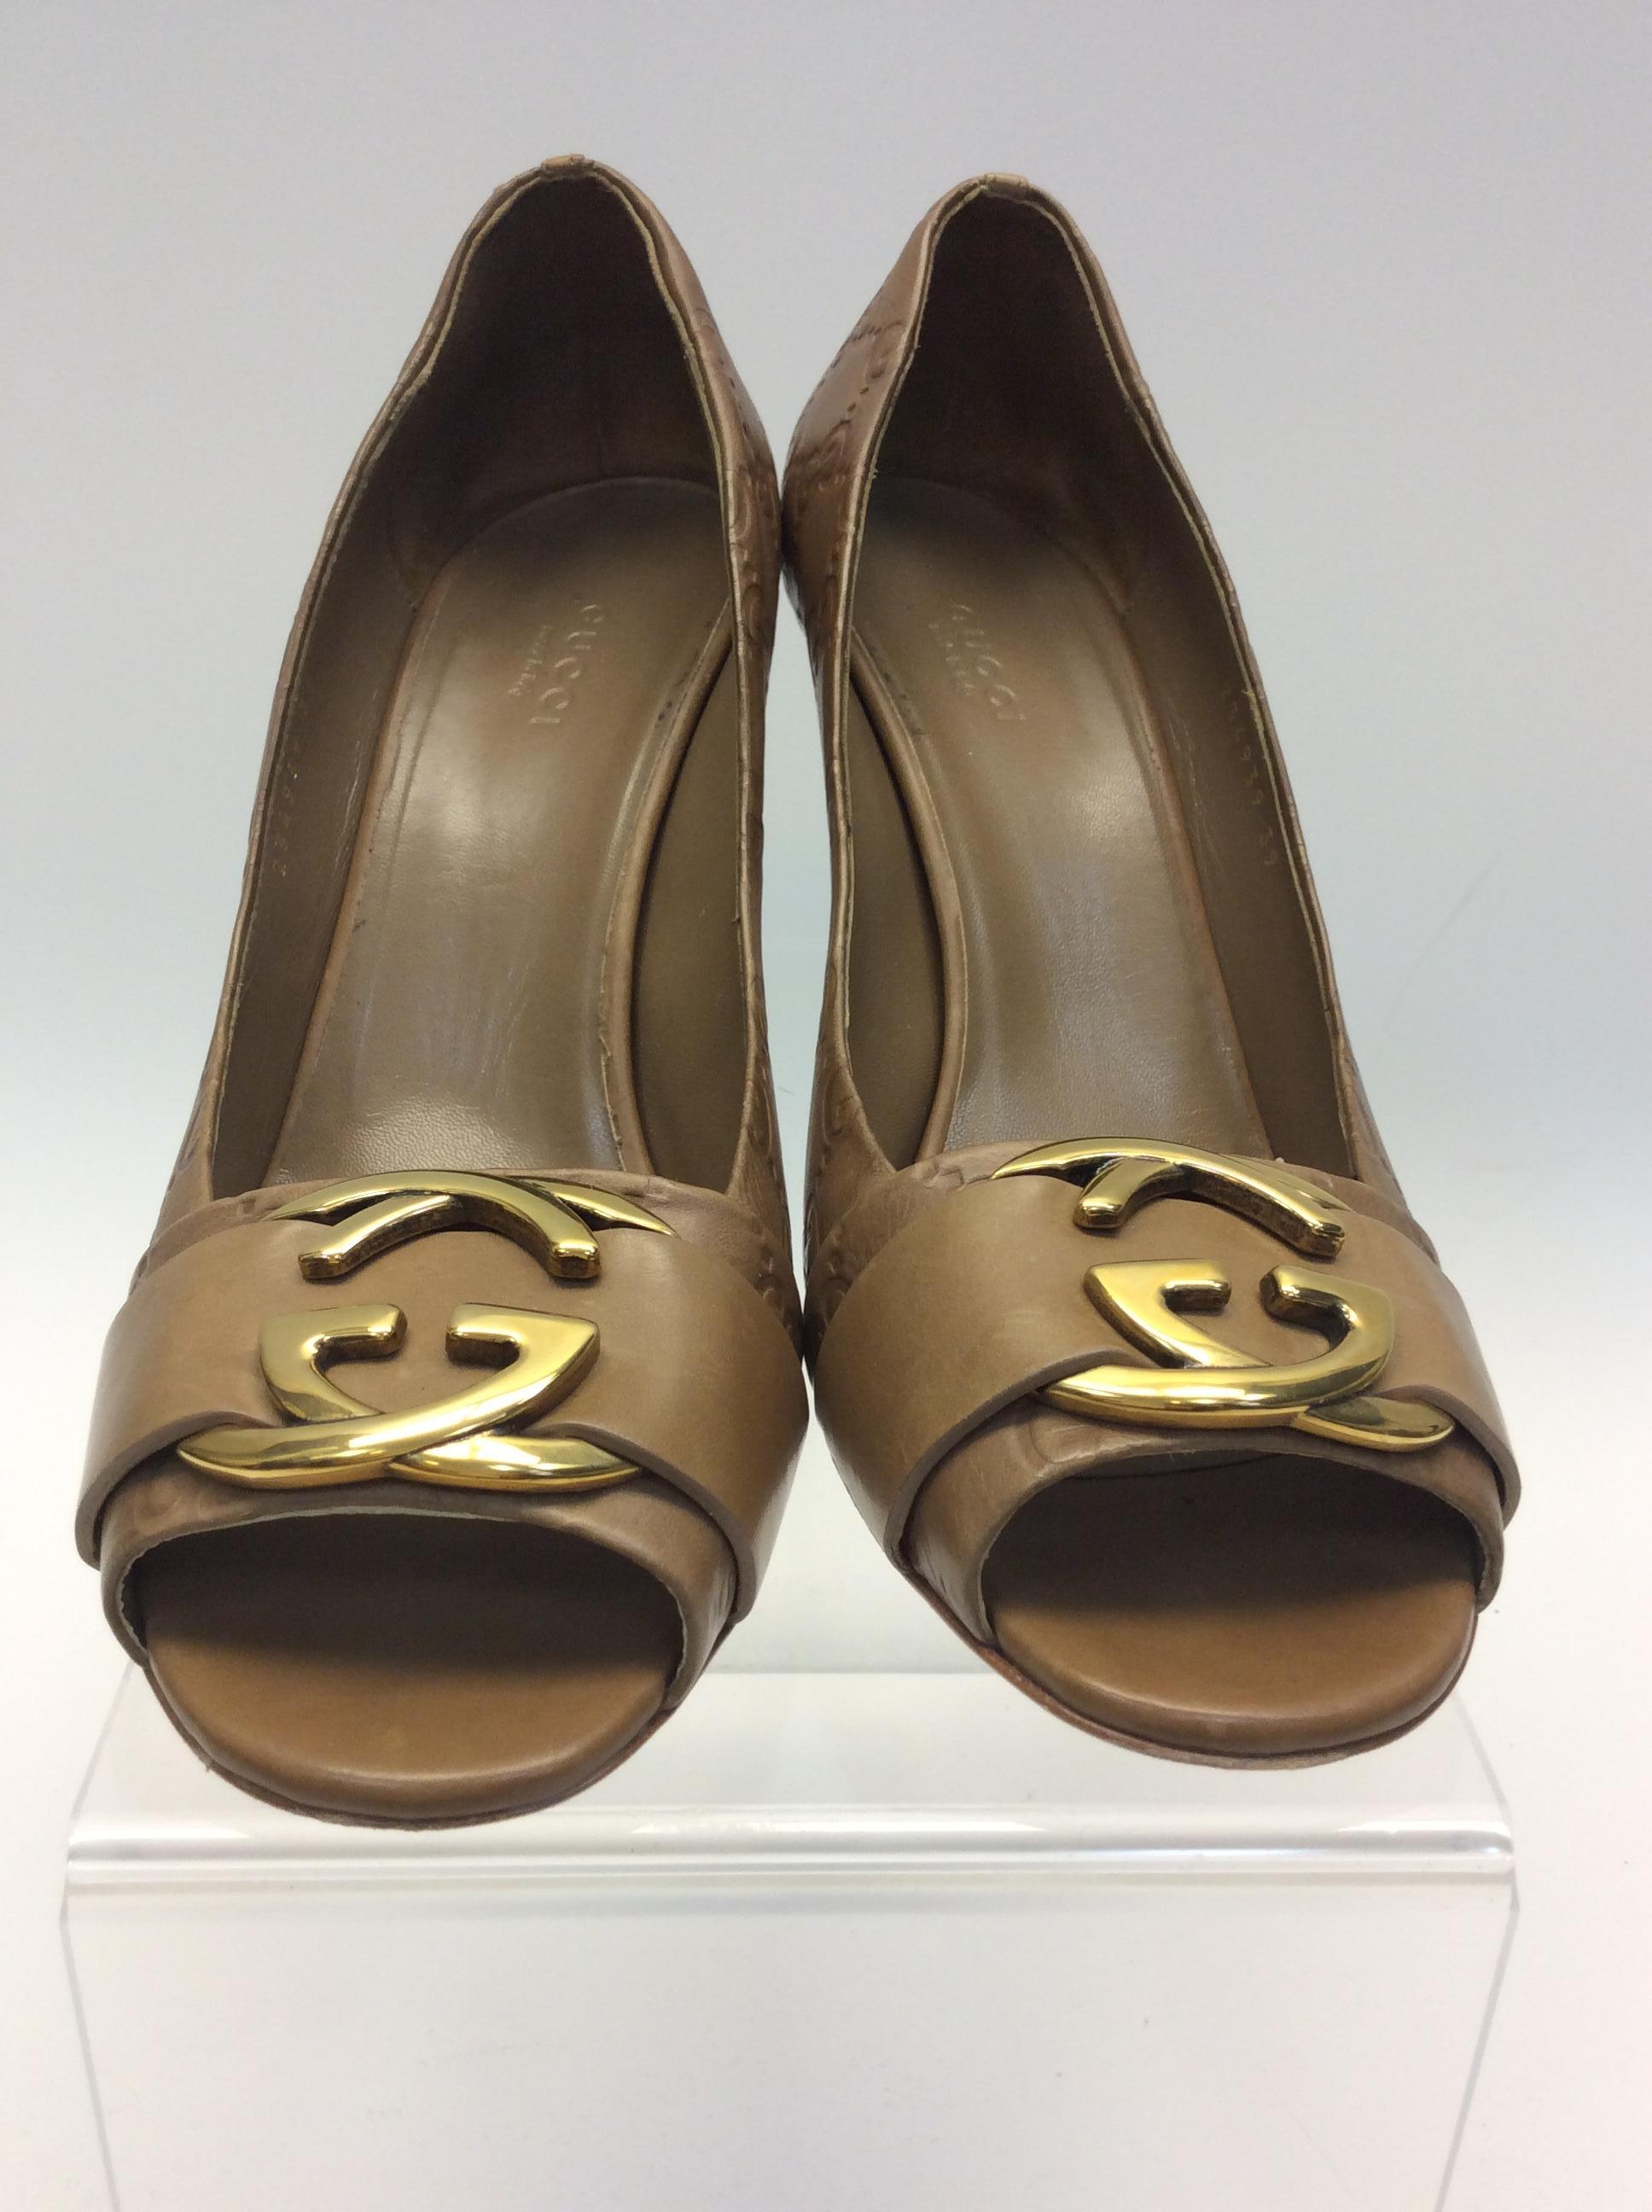 Gucci Camel Leather Logo Pump
$265
Made in Italy
Leather
Size 39
3.5” heel